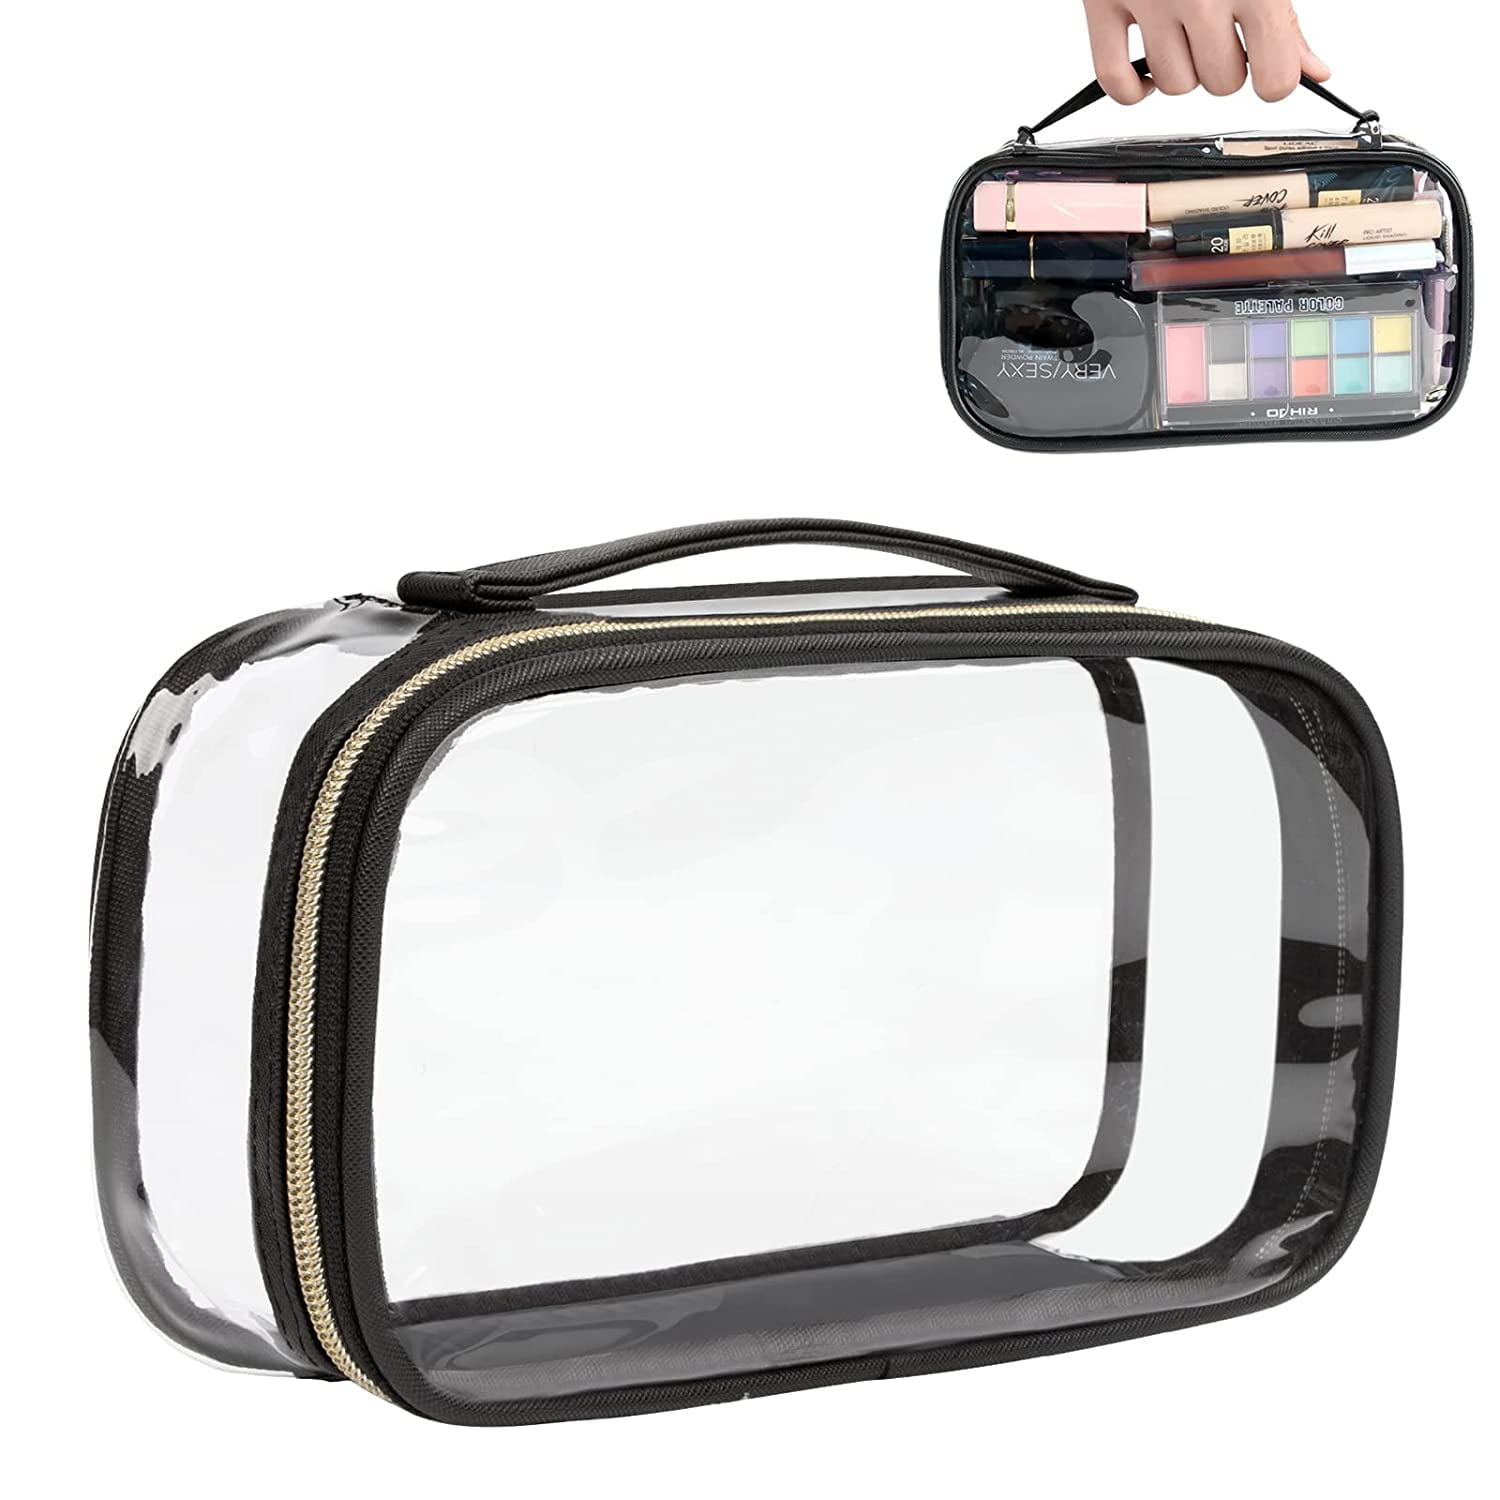 Clear Toiletry Bag, 3 Pack Toiletry Bag Quart Size Bag, Travel